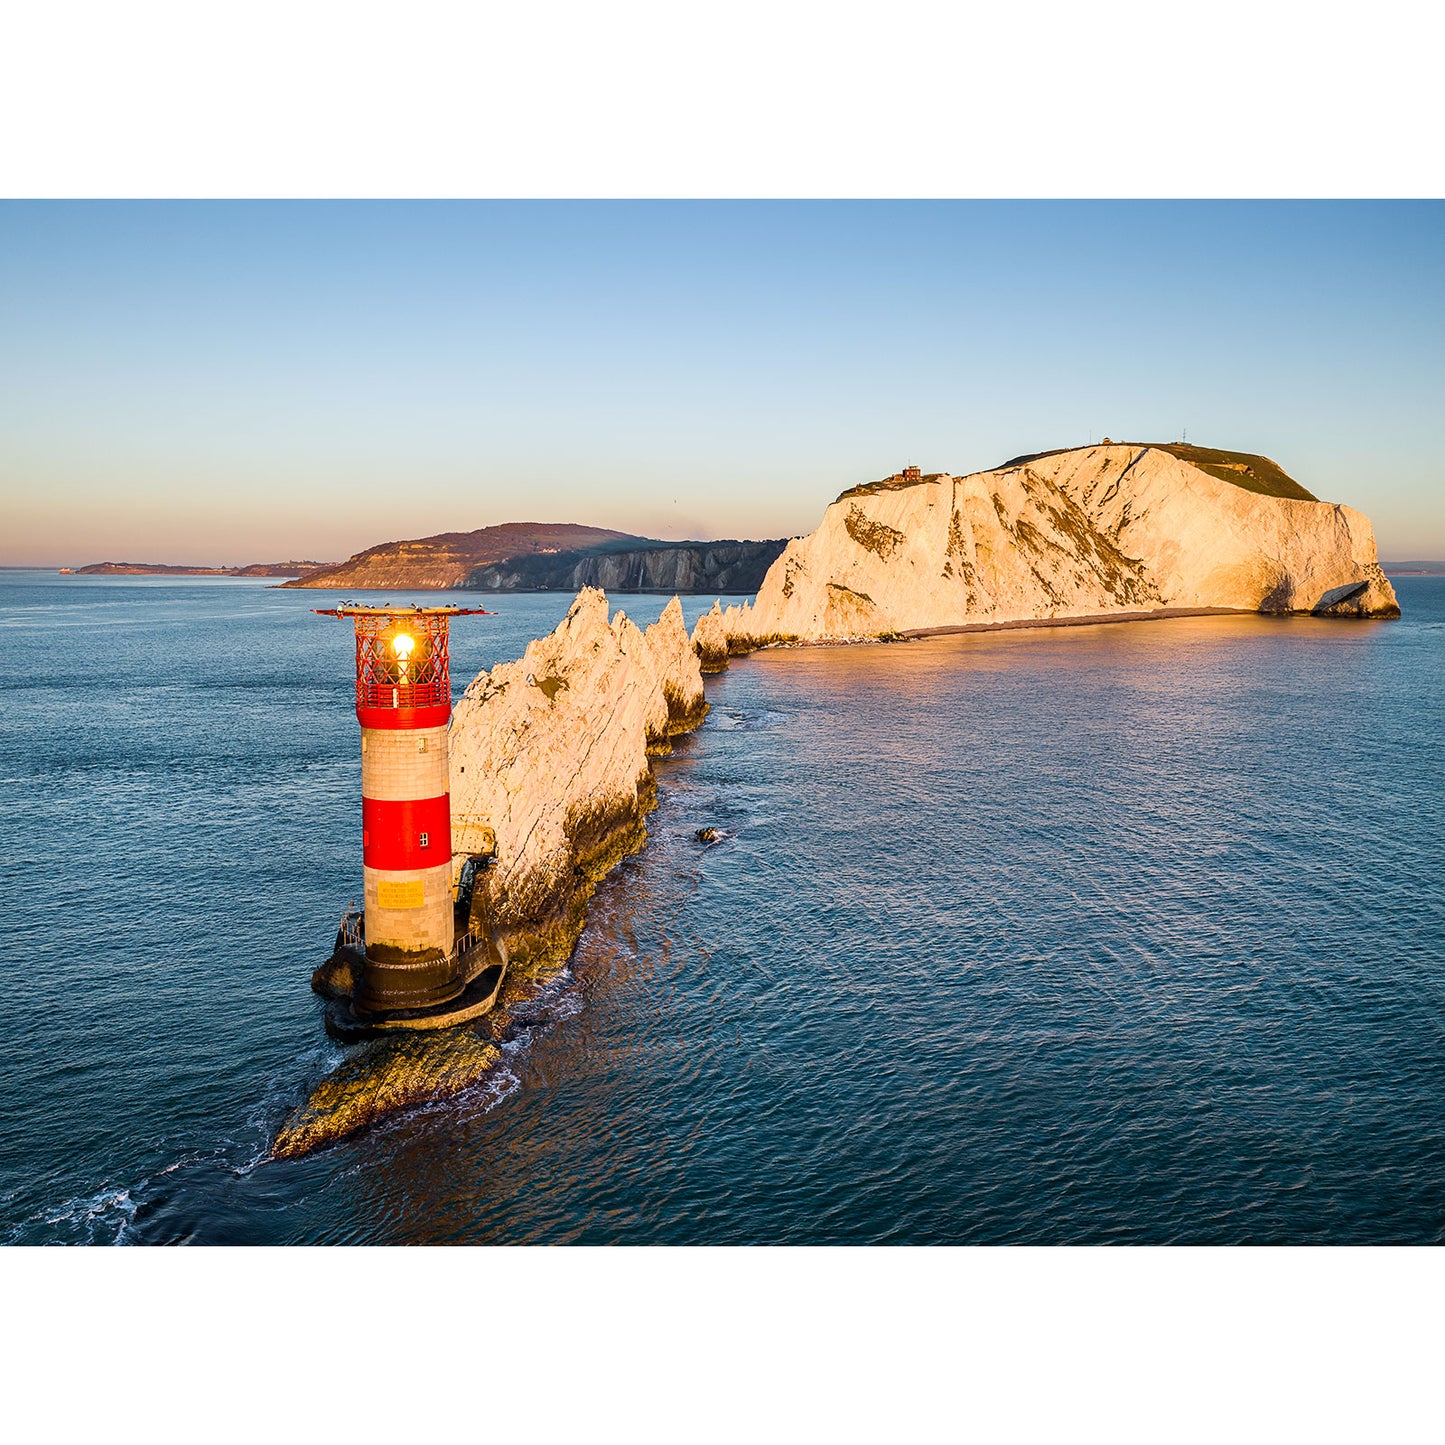 Aerial view of The Needles lighthouse on the Isle of Wight coastal cliff at sunset, captured by Available Light Photography.